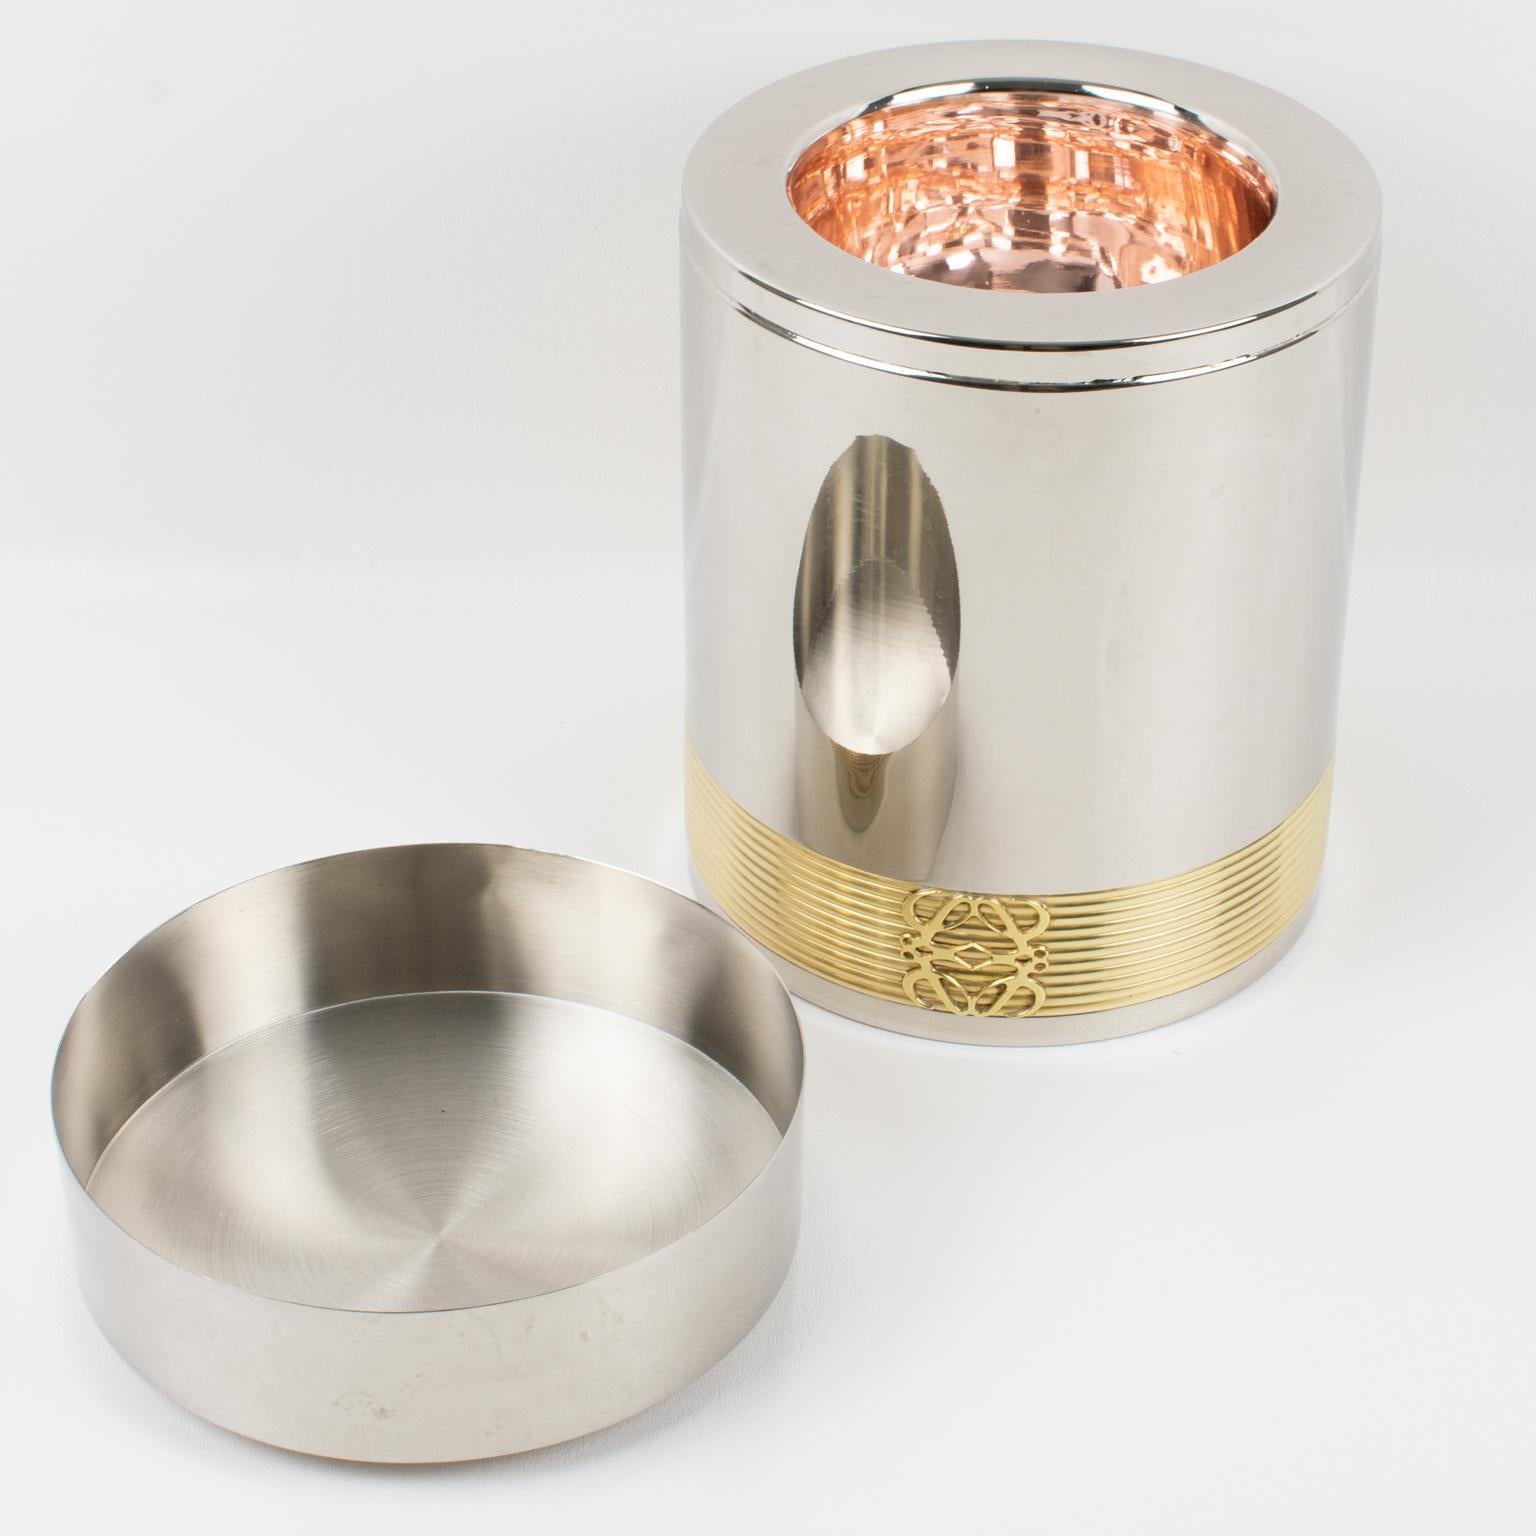 Late 20th Century Loewe Spain Chrome and Gilded Brass Barware Ice Bucket For Sale